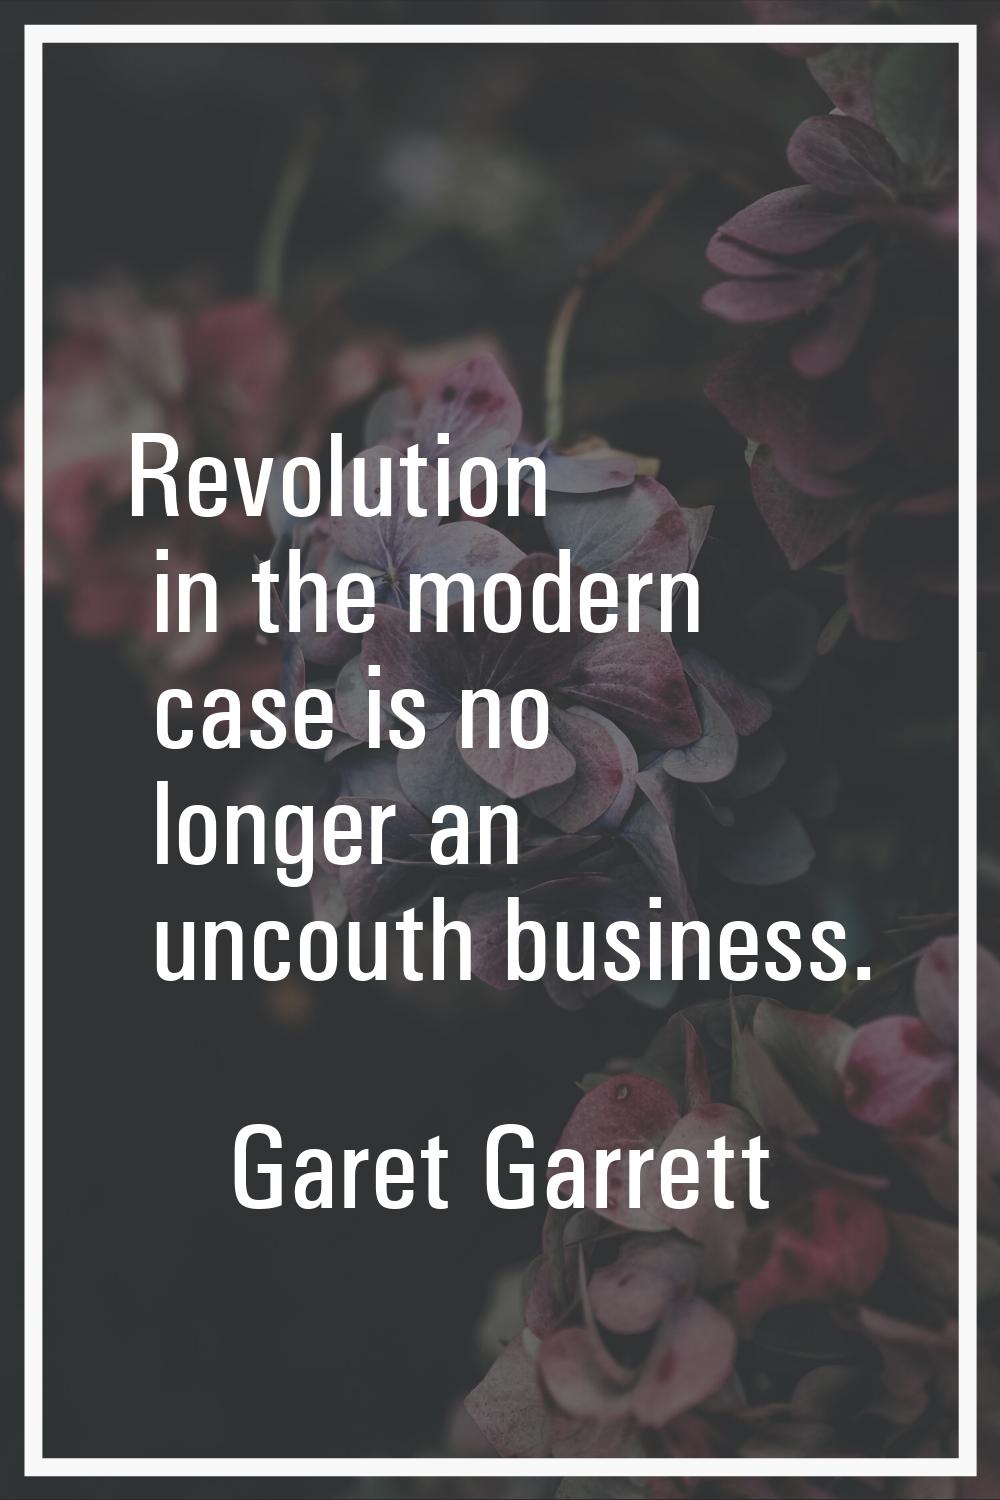 Revolution in the modern case is no longer an uncouth business.